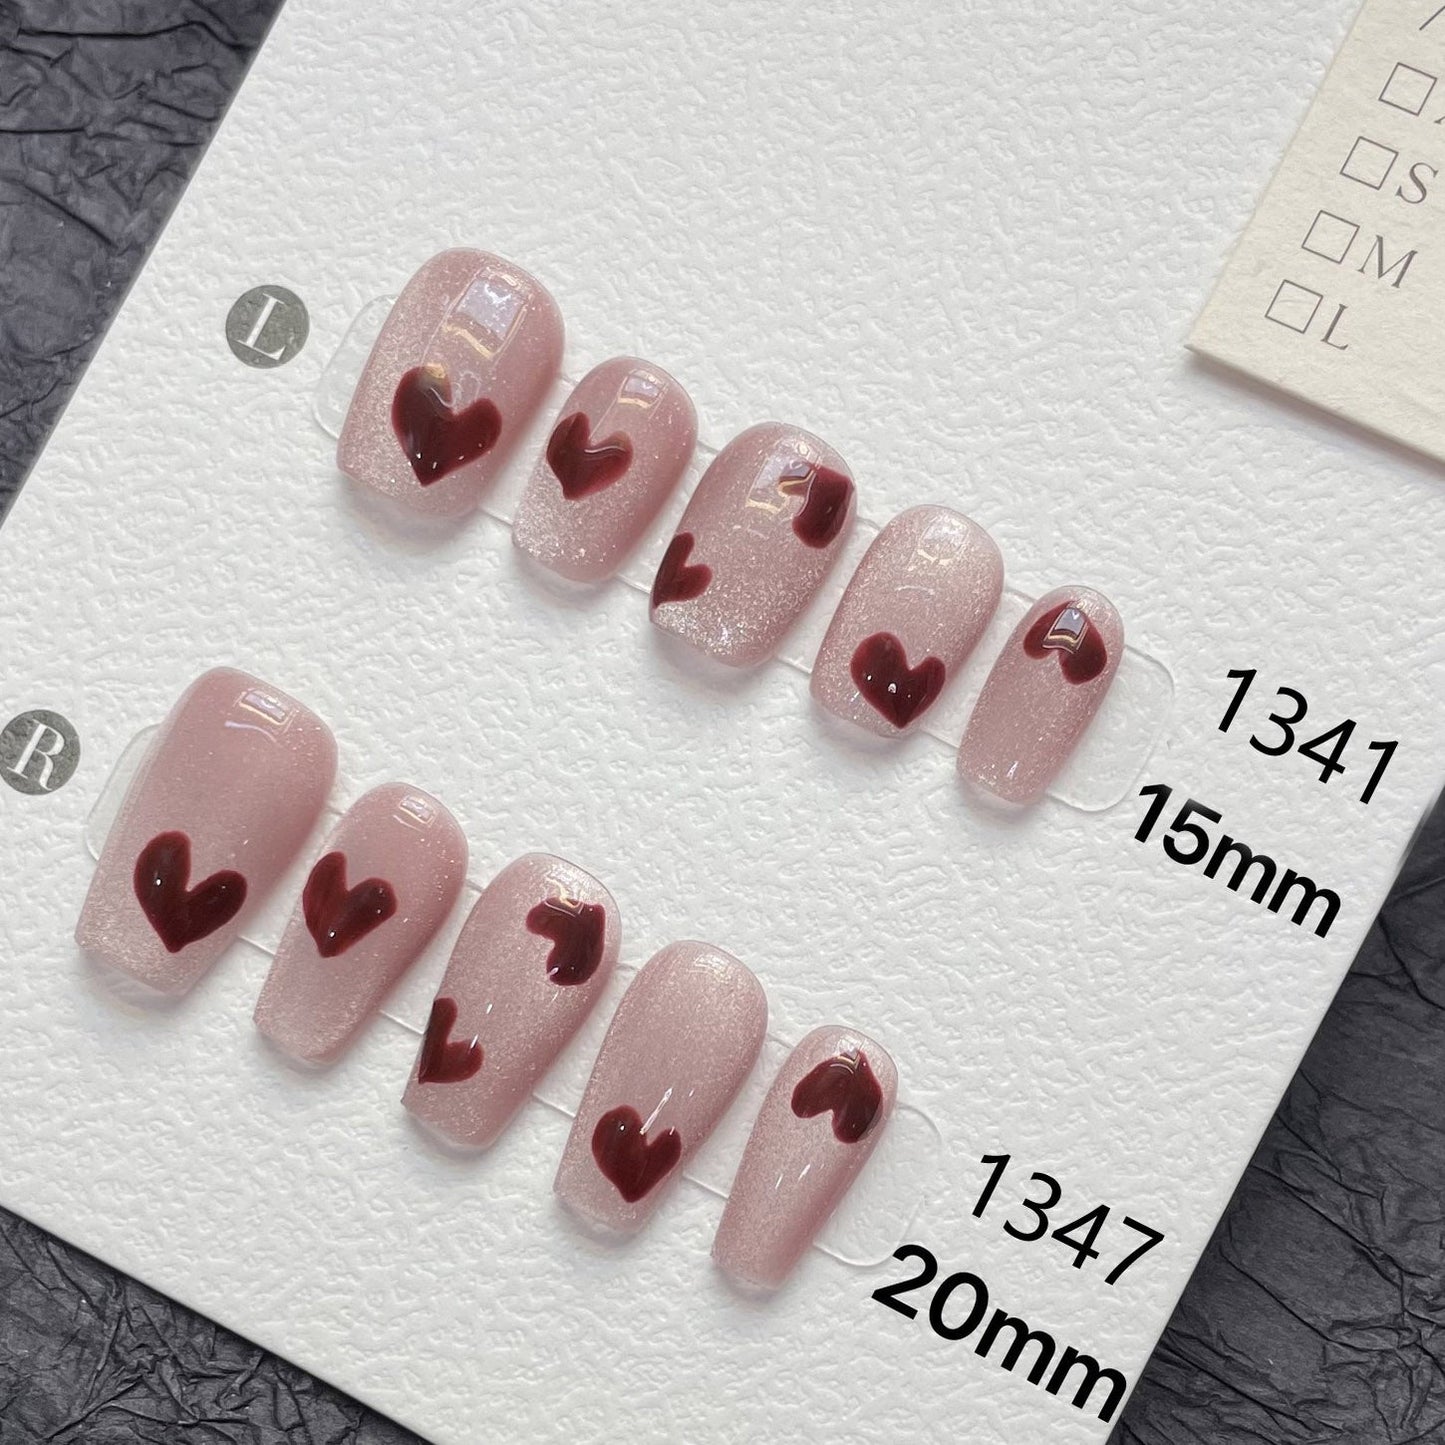 1341/1347 Cat's eye style press on nails 100% handmade false nails red pink